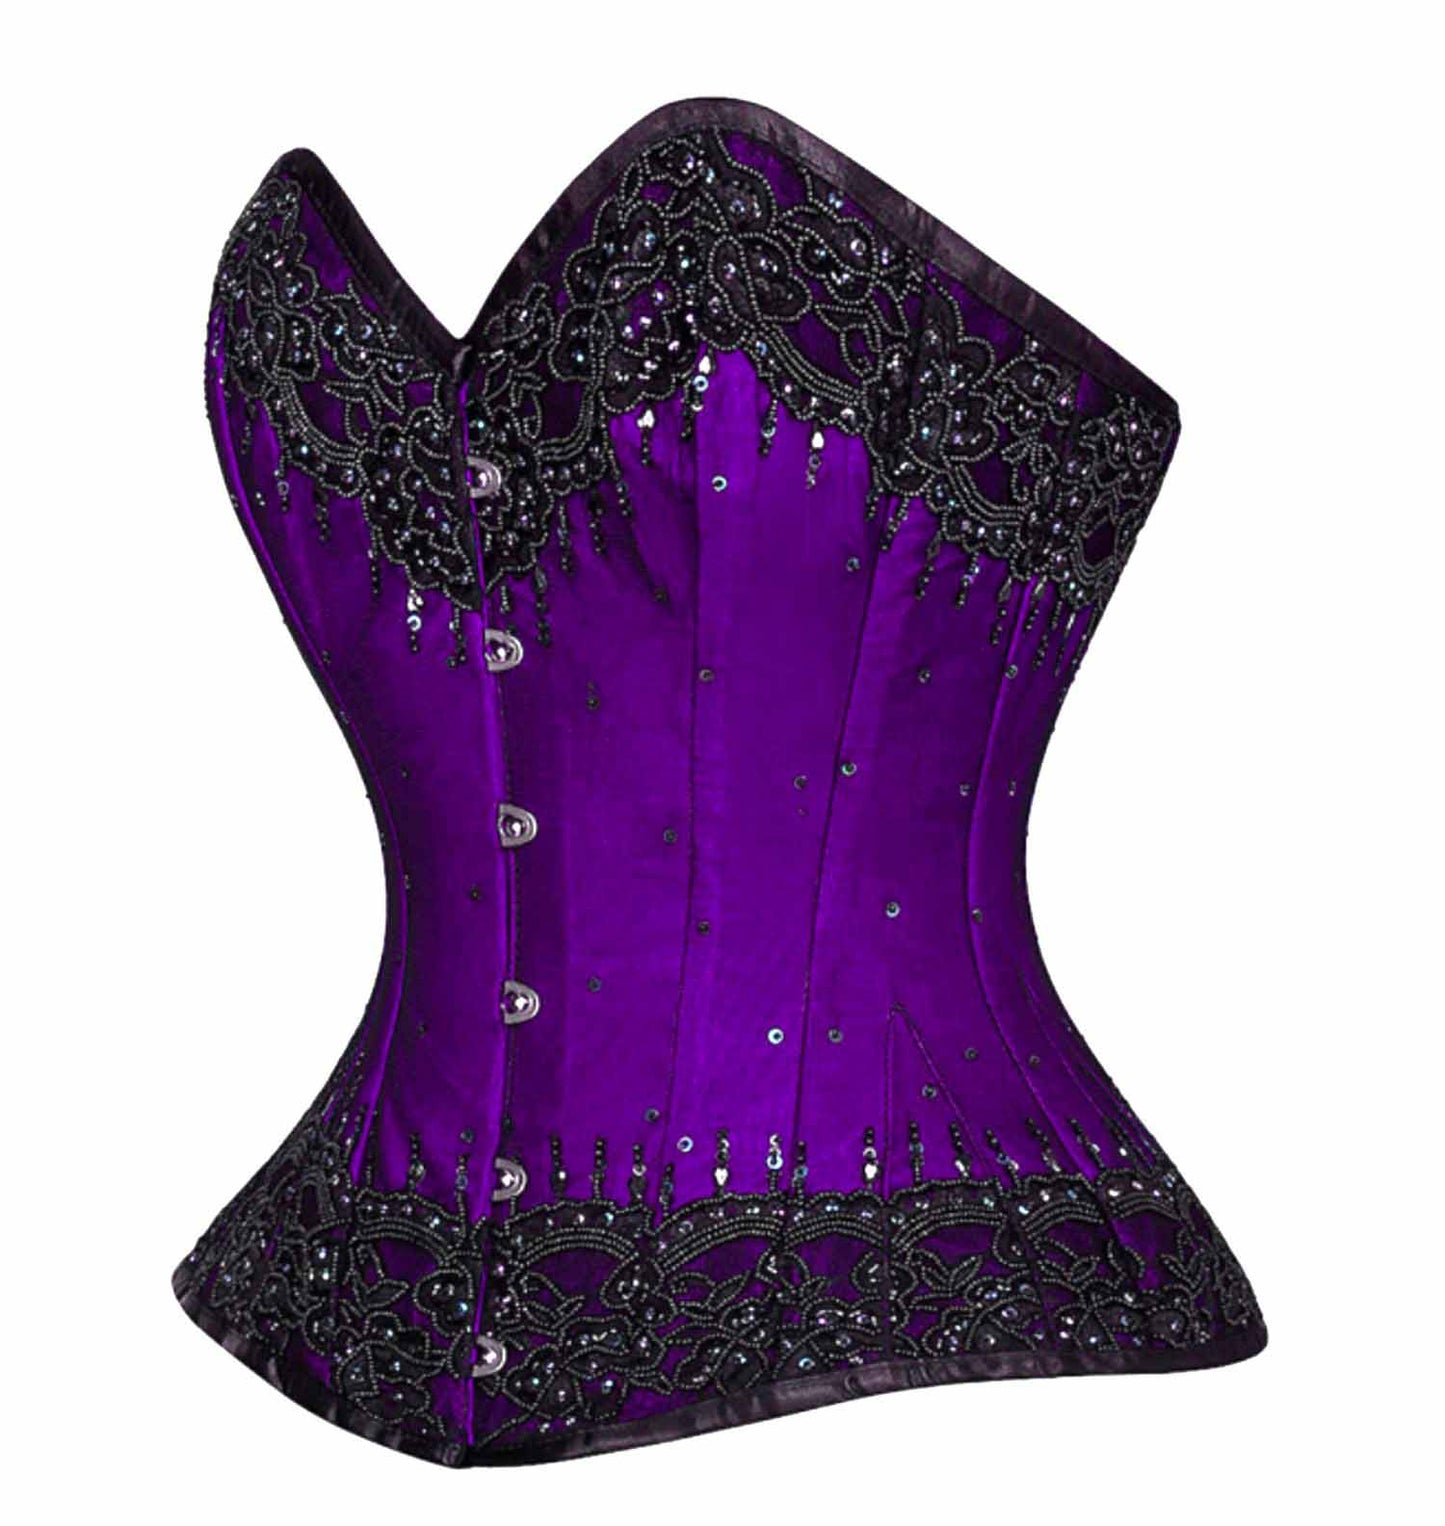 The front and left side of the purple and black Beaded Lace Overlay Couture Corset.